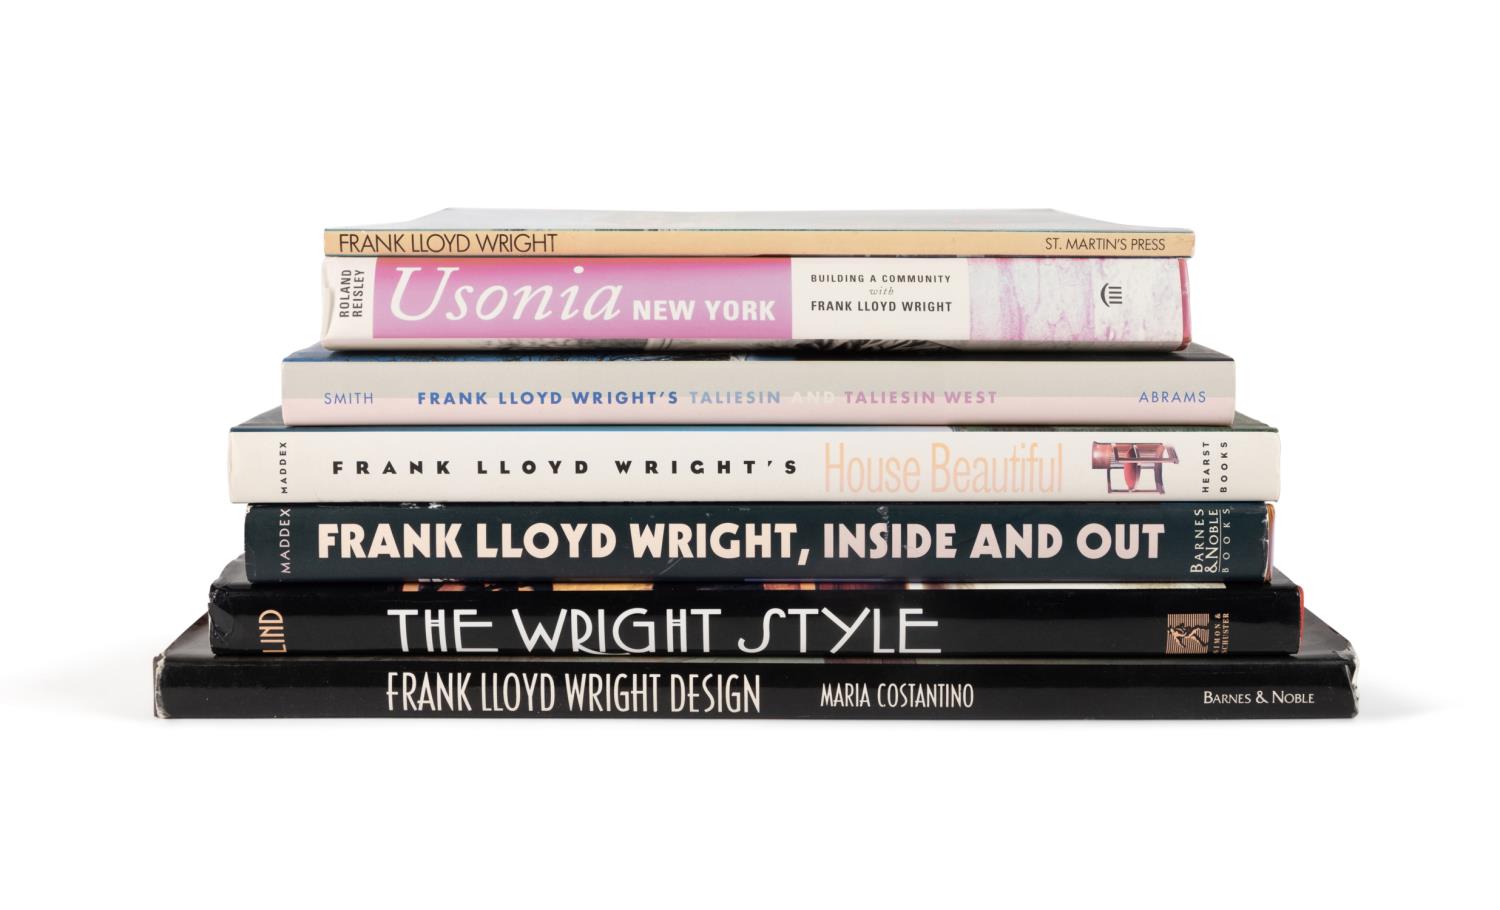 SEVEN COFFEE TABLE BOOKS ON FRANK 3cd9d5